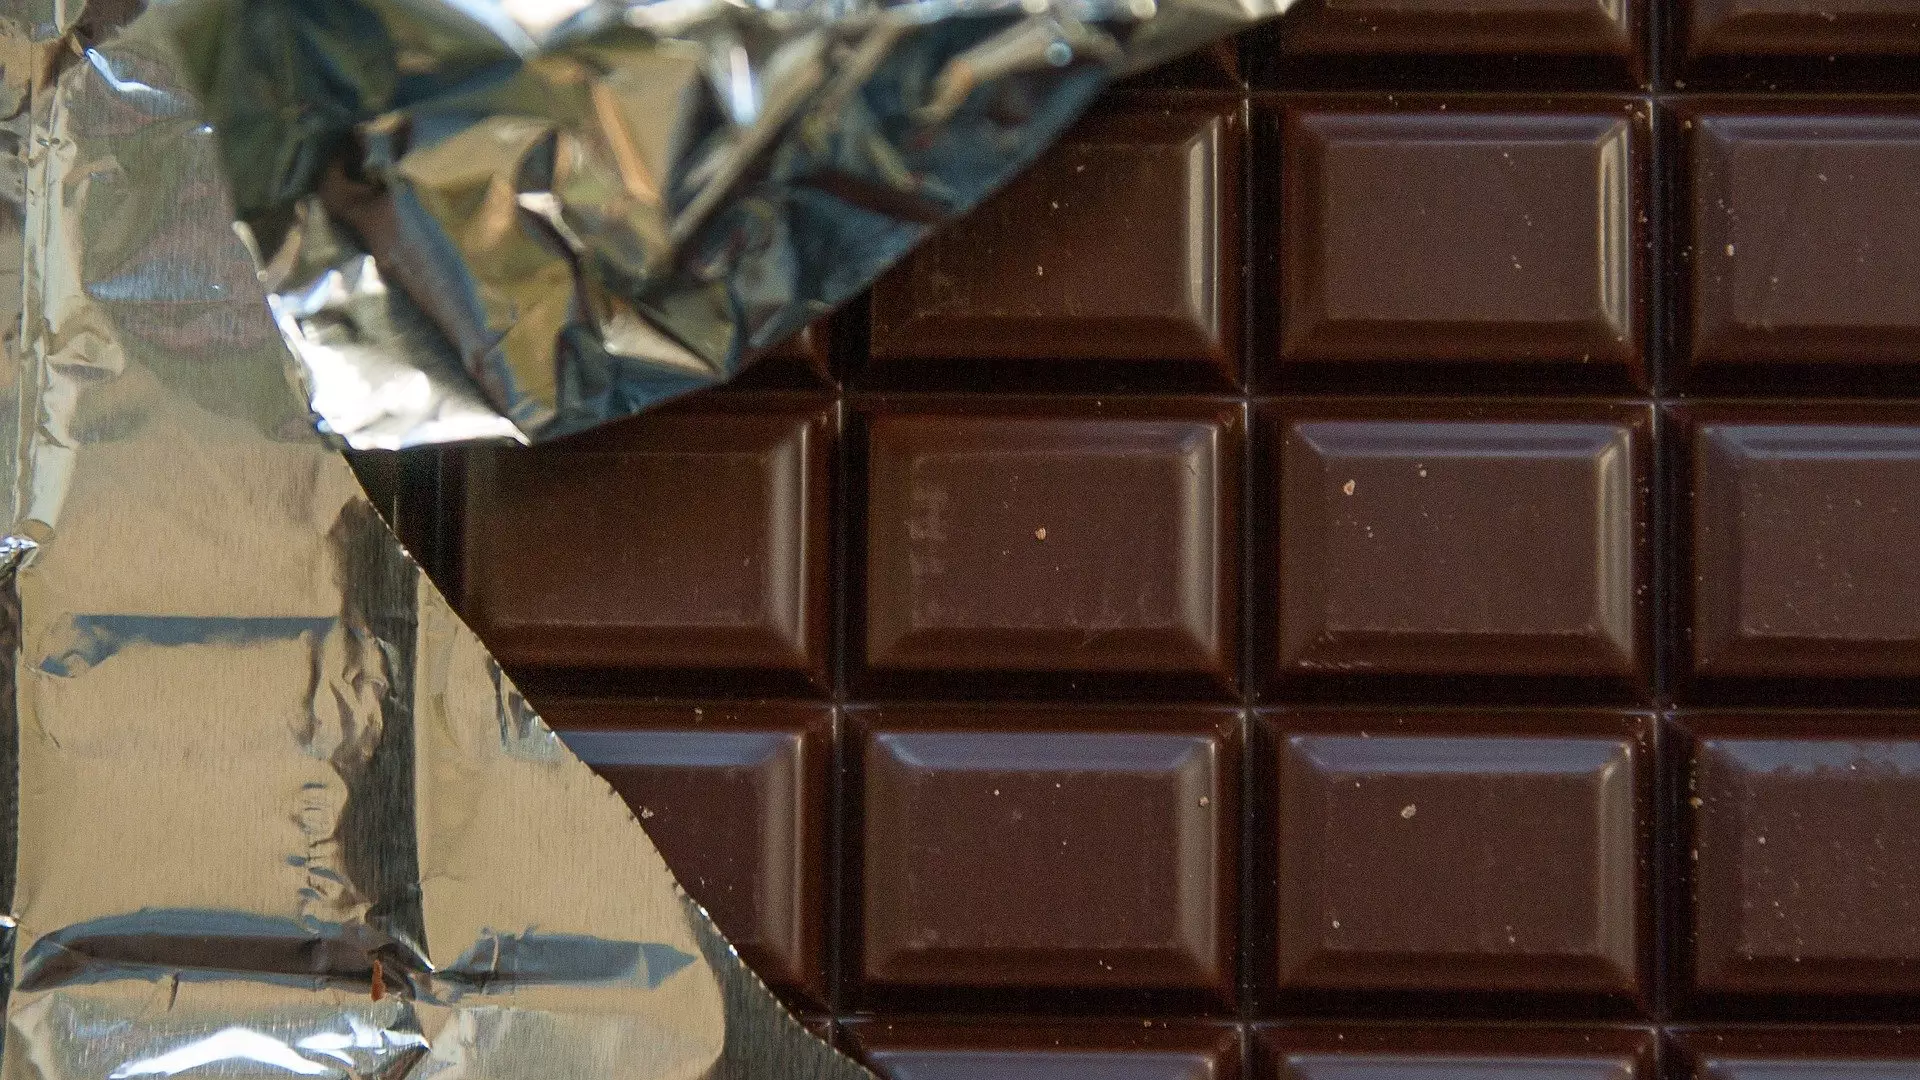 Dark Chocolate Is Officially The Food That Makes You Happiest